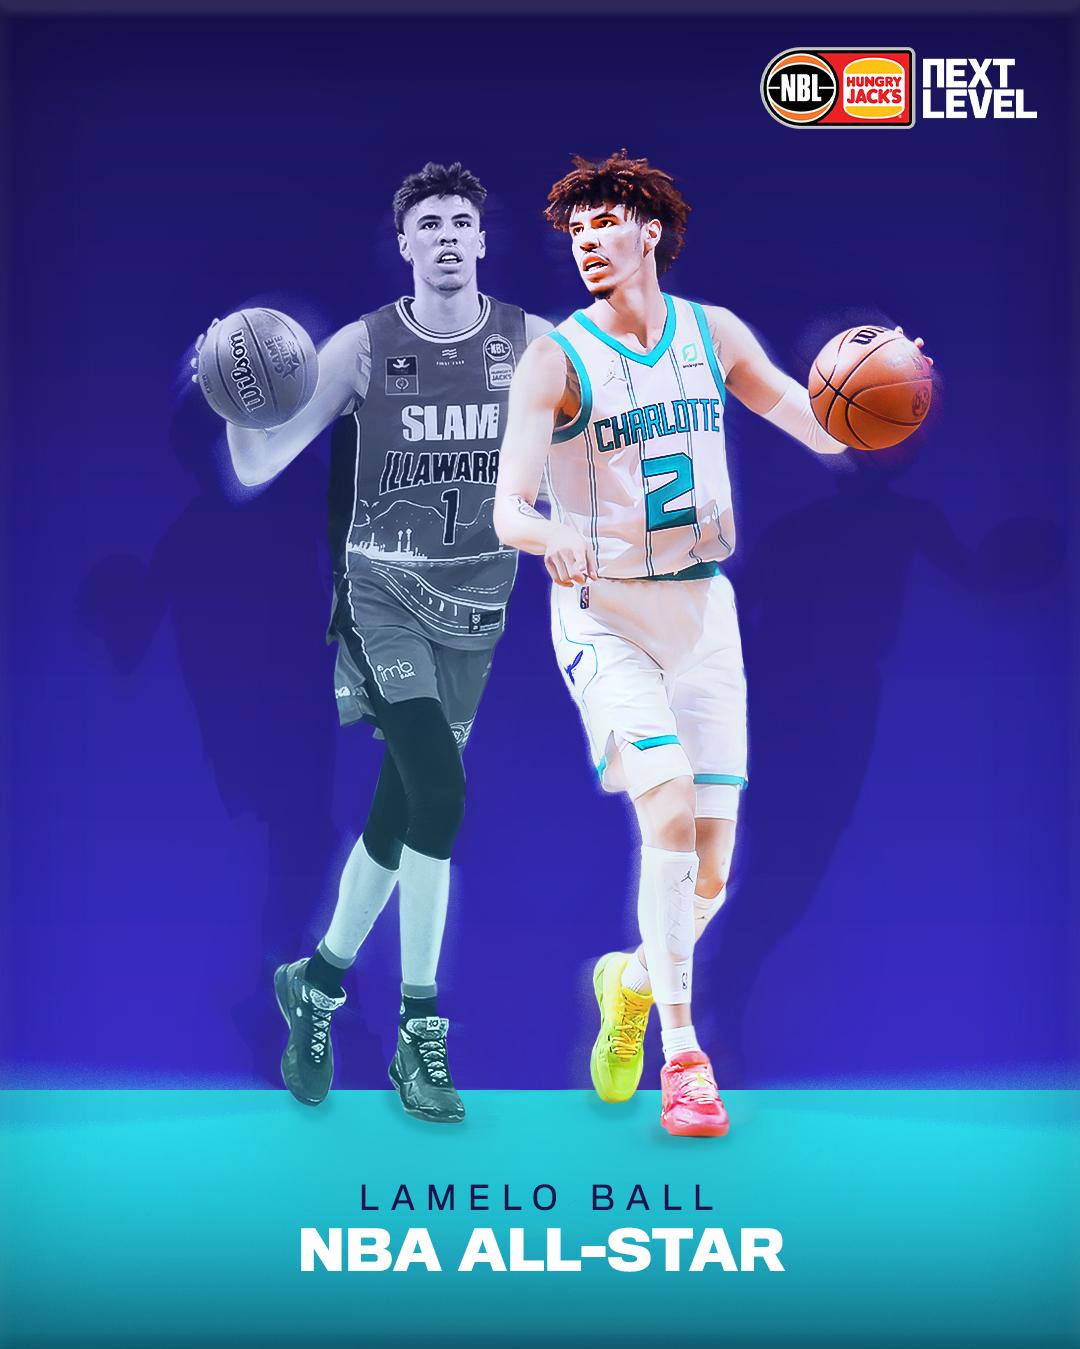 Nbl Congratulations To Lamelo Ball On Being Named An Nba